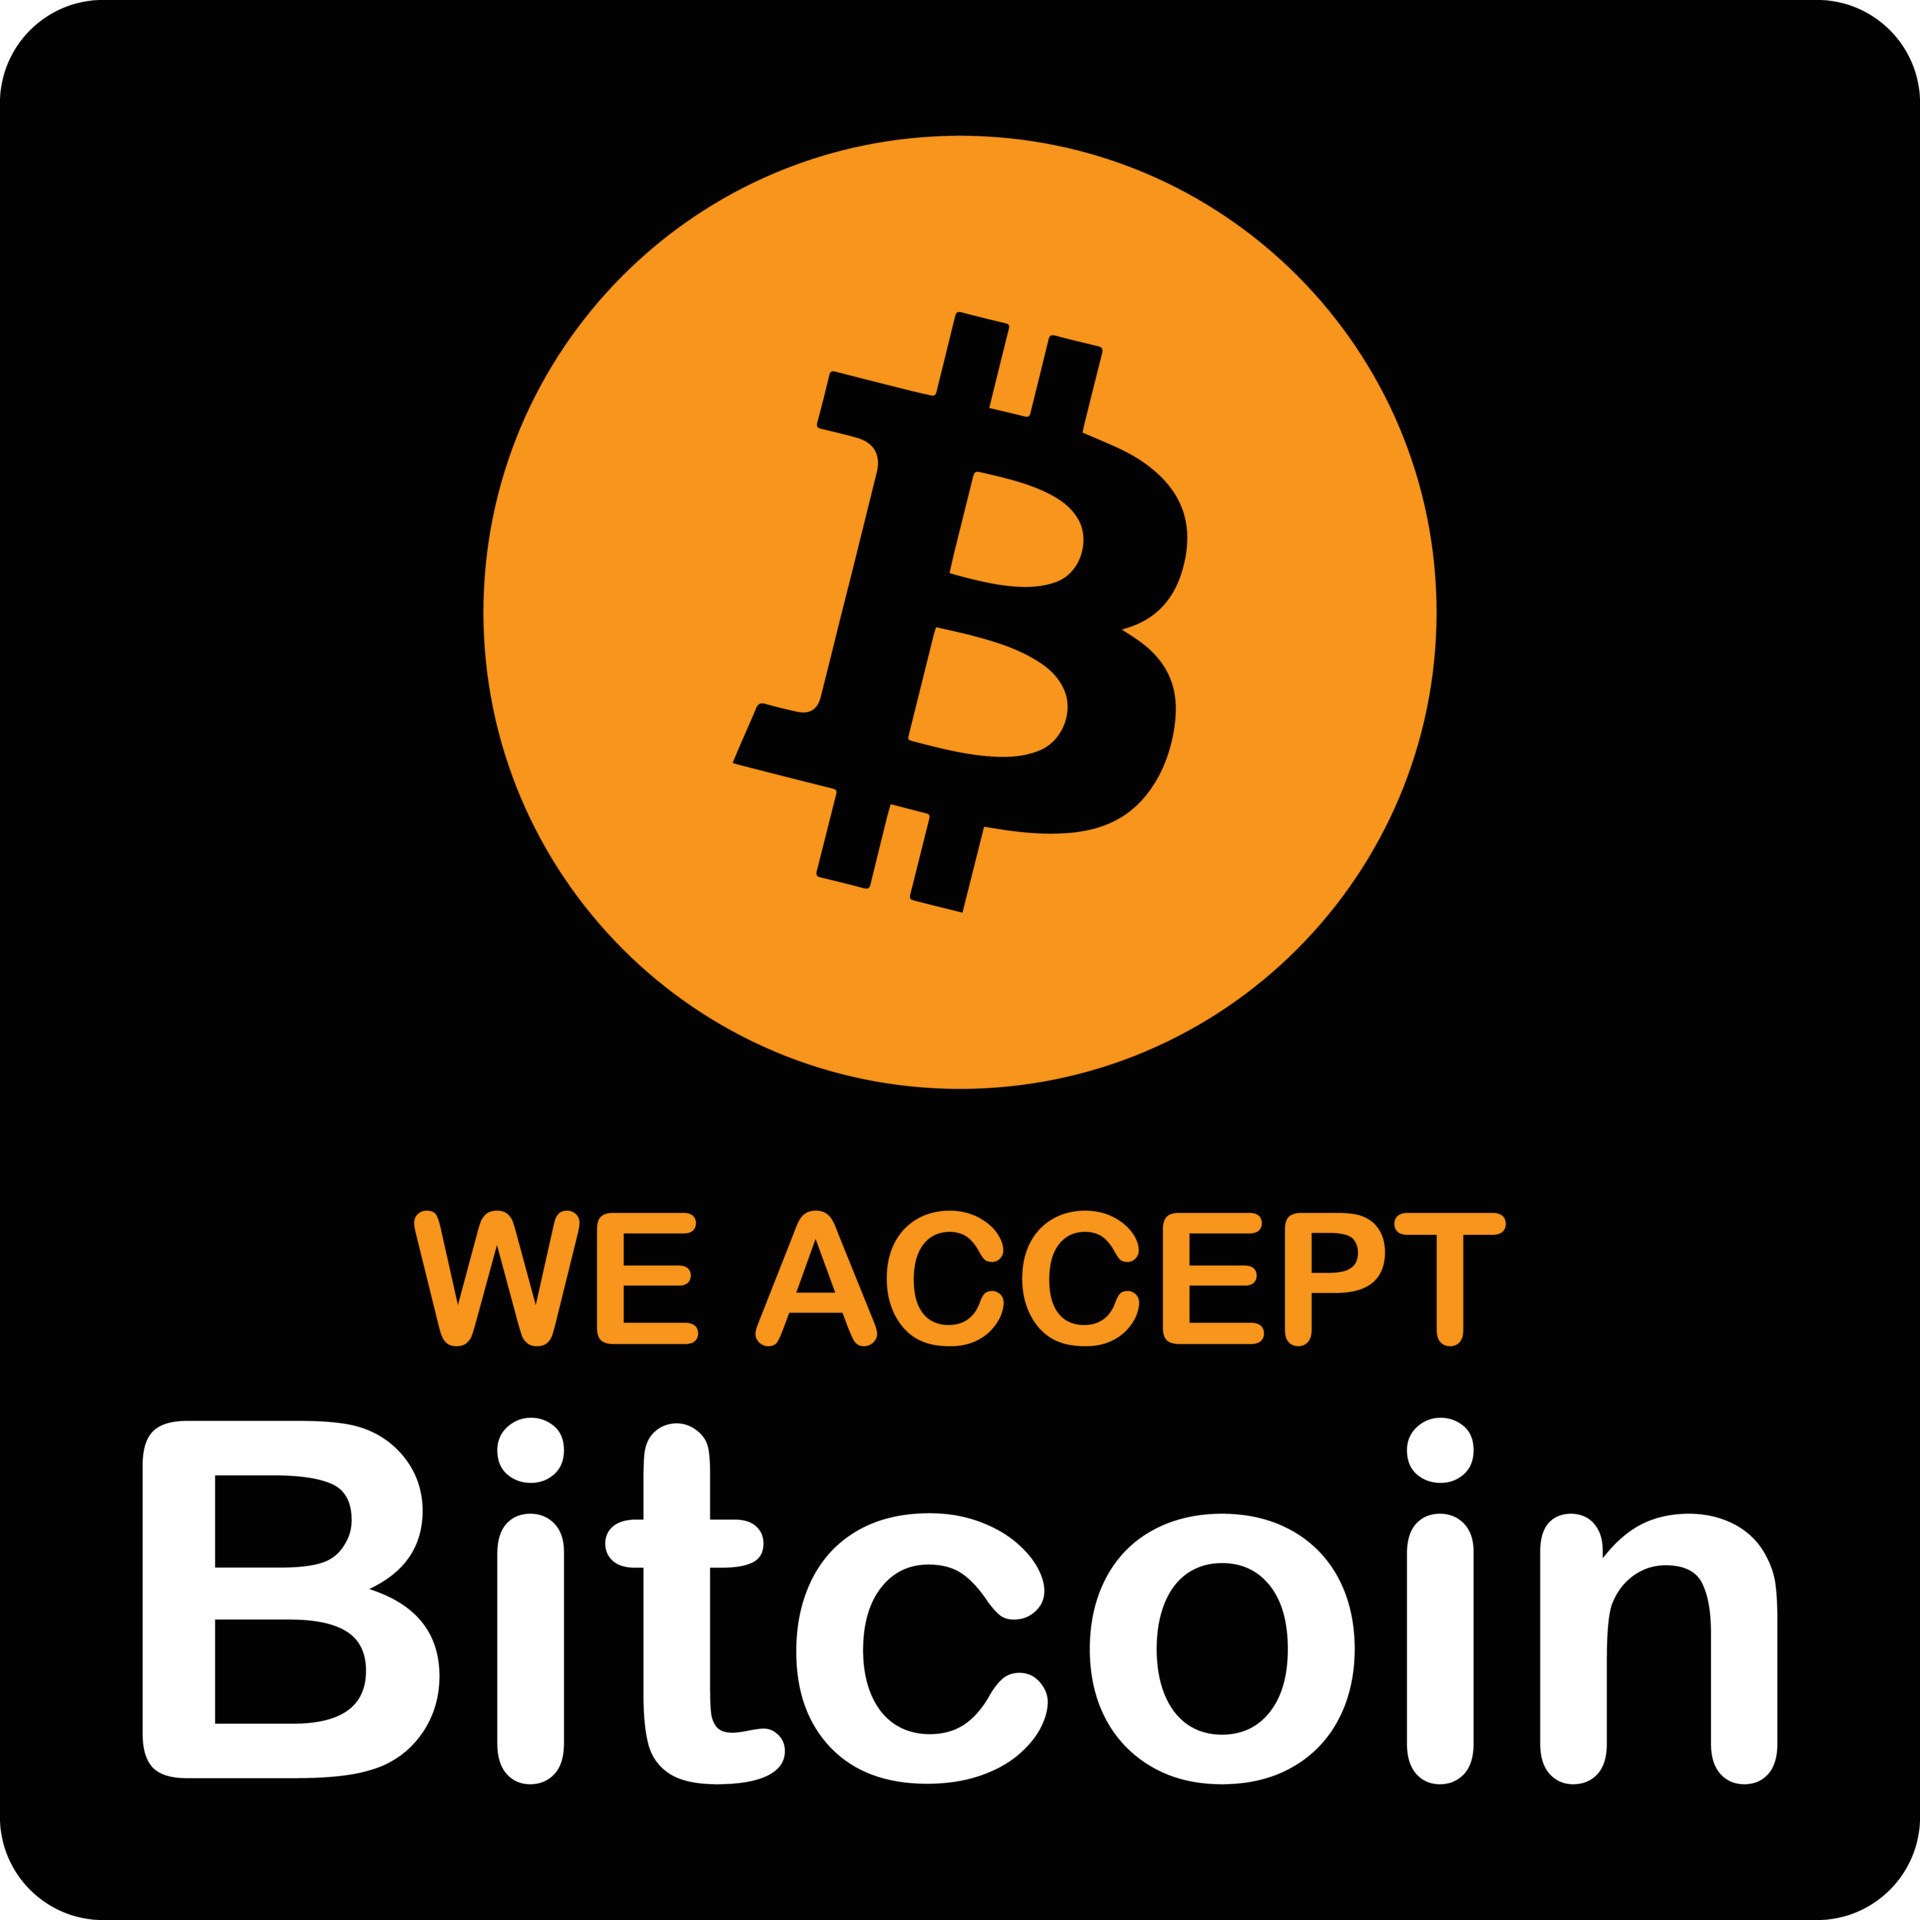 23 Online Stores that Accept Bitcoin